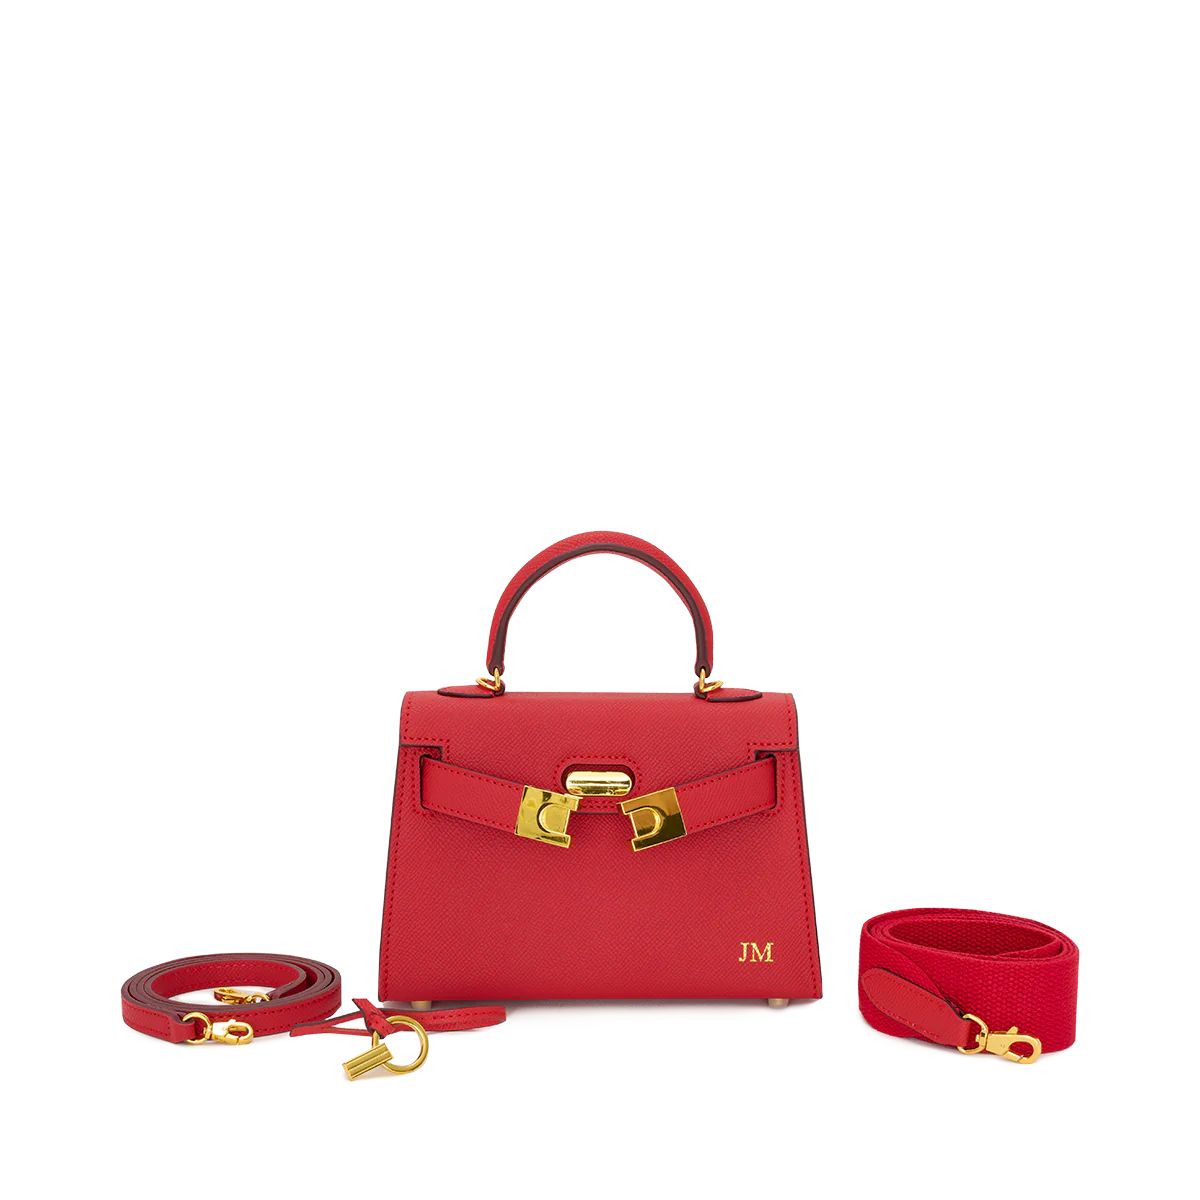 Lily and Bean Evie Leather Bag Red | Lily and Bean